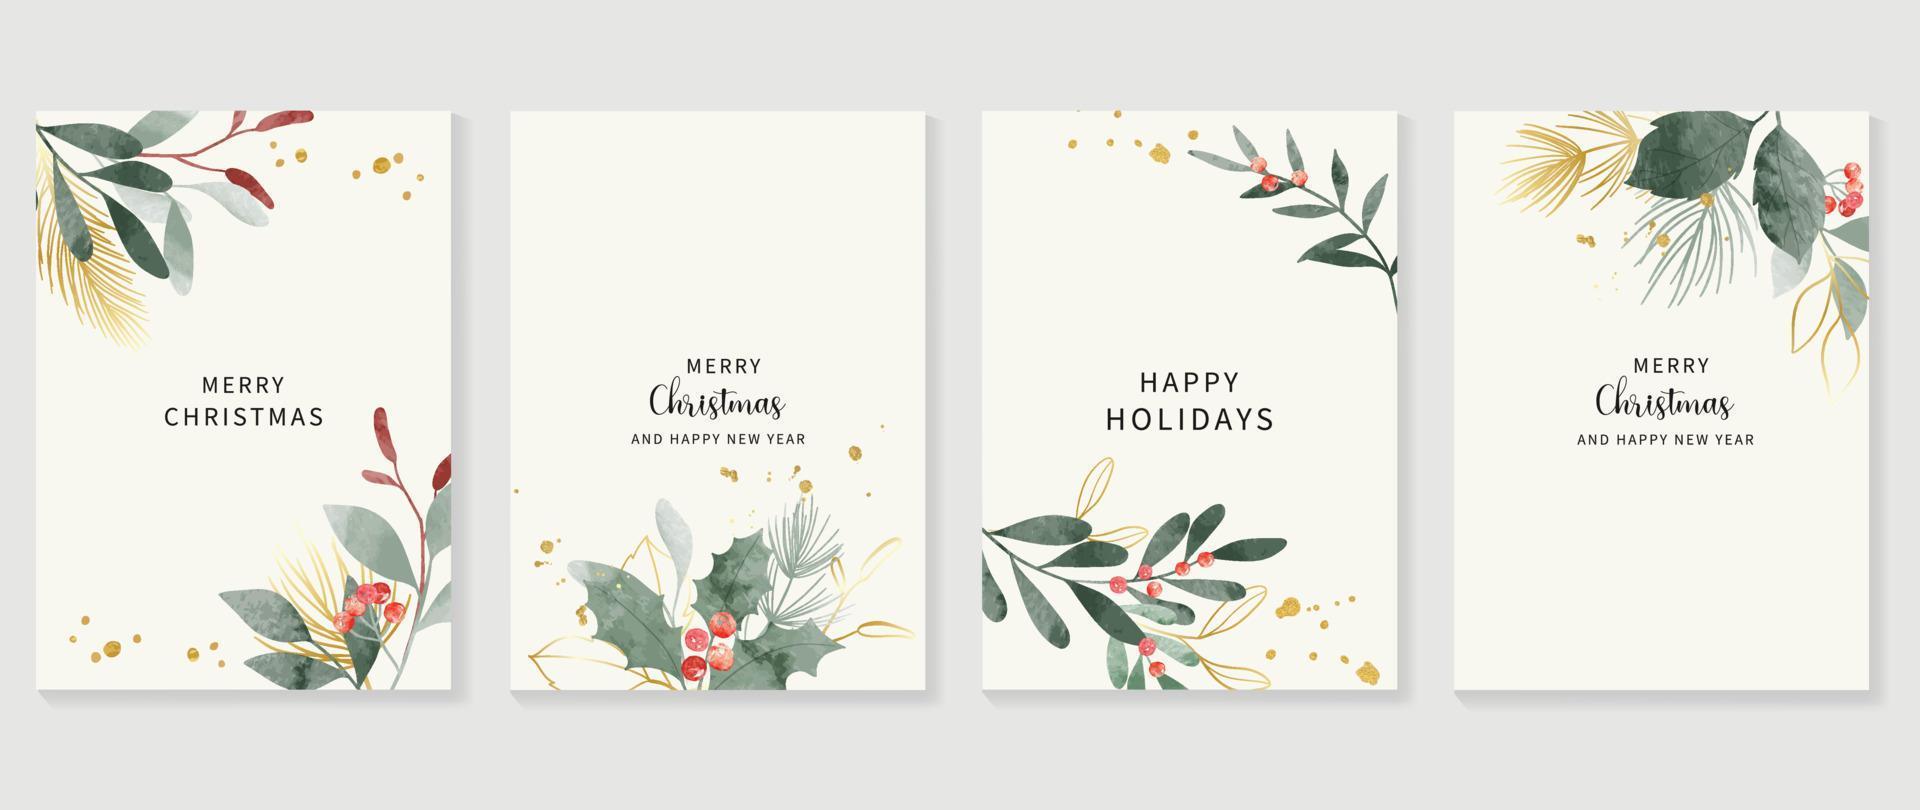 Luxury christmas and happy new year holiday cover template vector set. Watercolor winter leaf branch, holly, gold drop on white background. Design for card, corporate, greeting, wallpaper, poster.